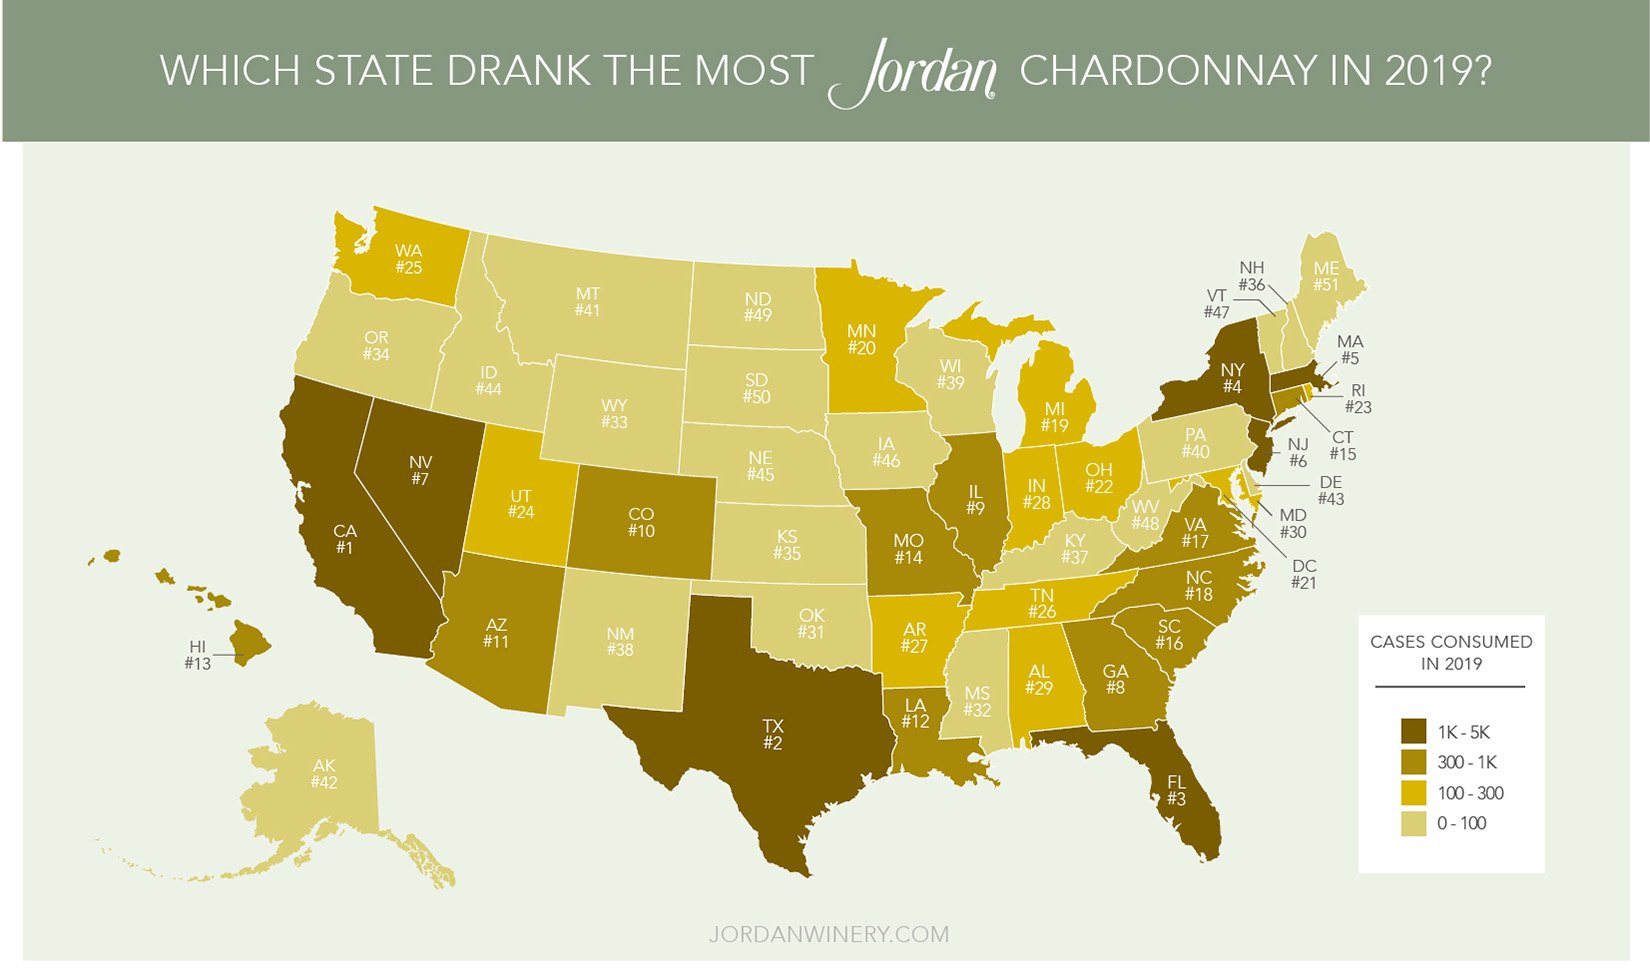 Map of how much Jordan Chardonnay was drank by state